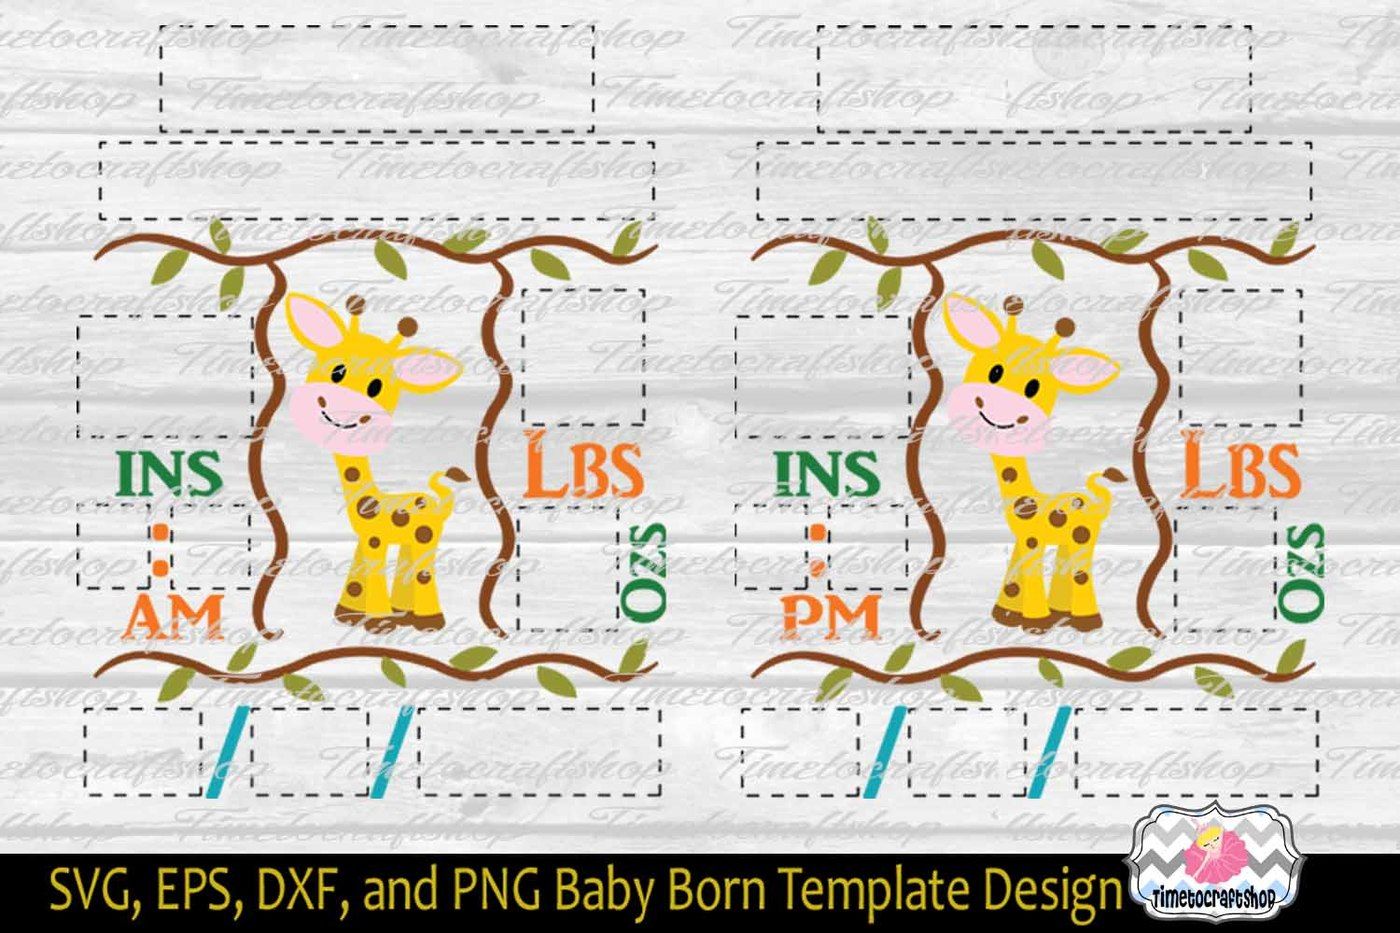 Download SVG, Dxf, Png & Eps Cutting Files Baby Birth Announcement ...